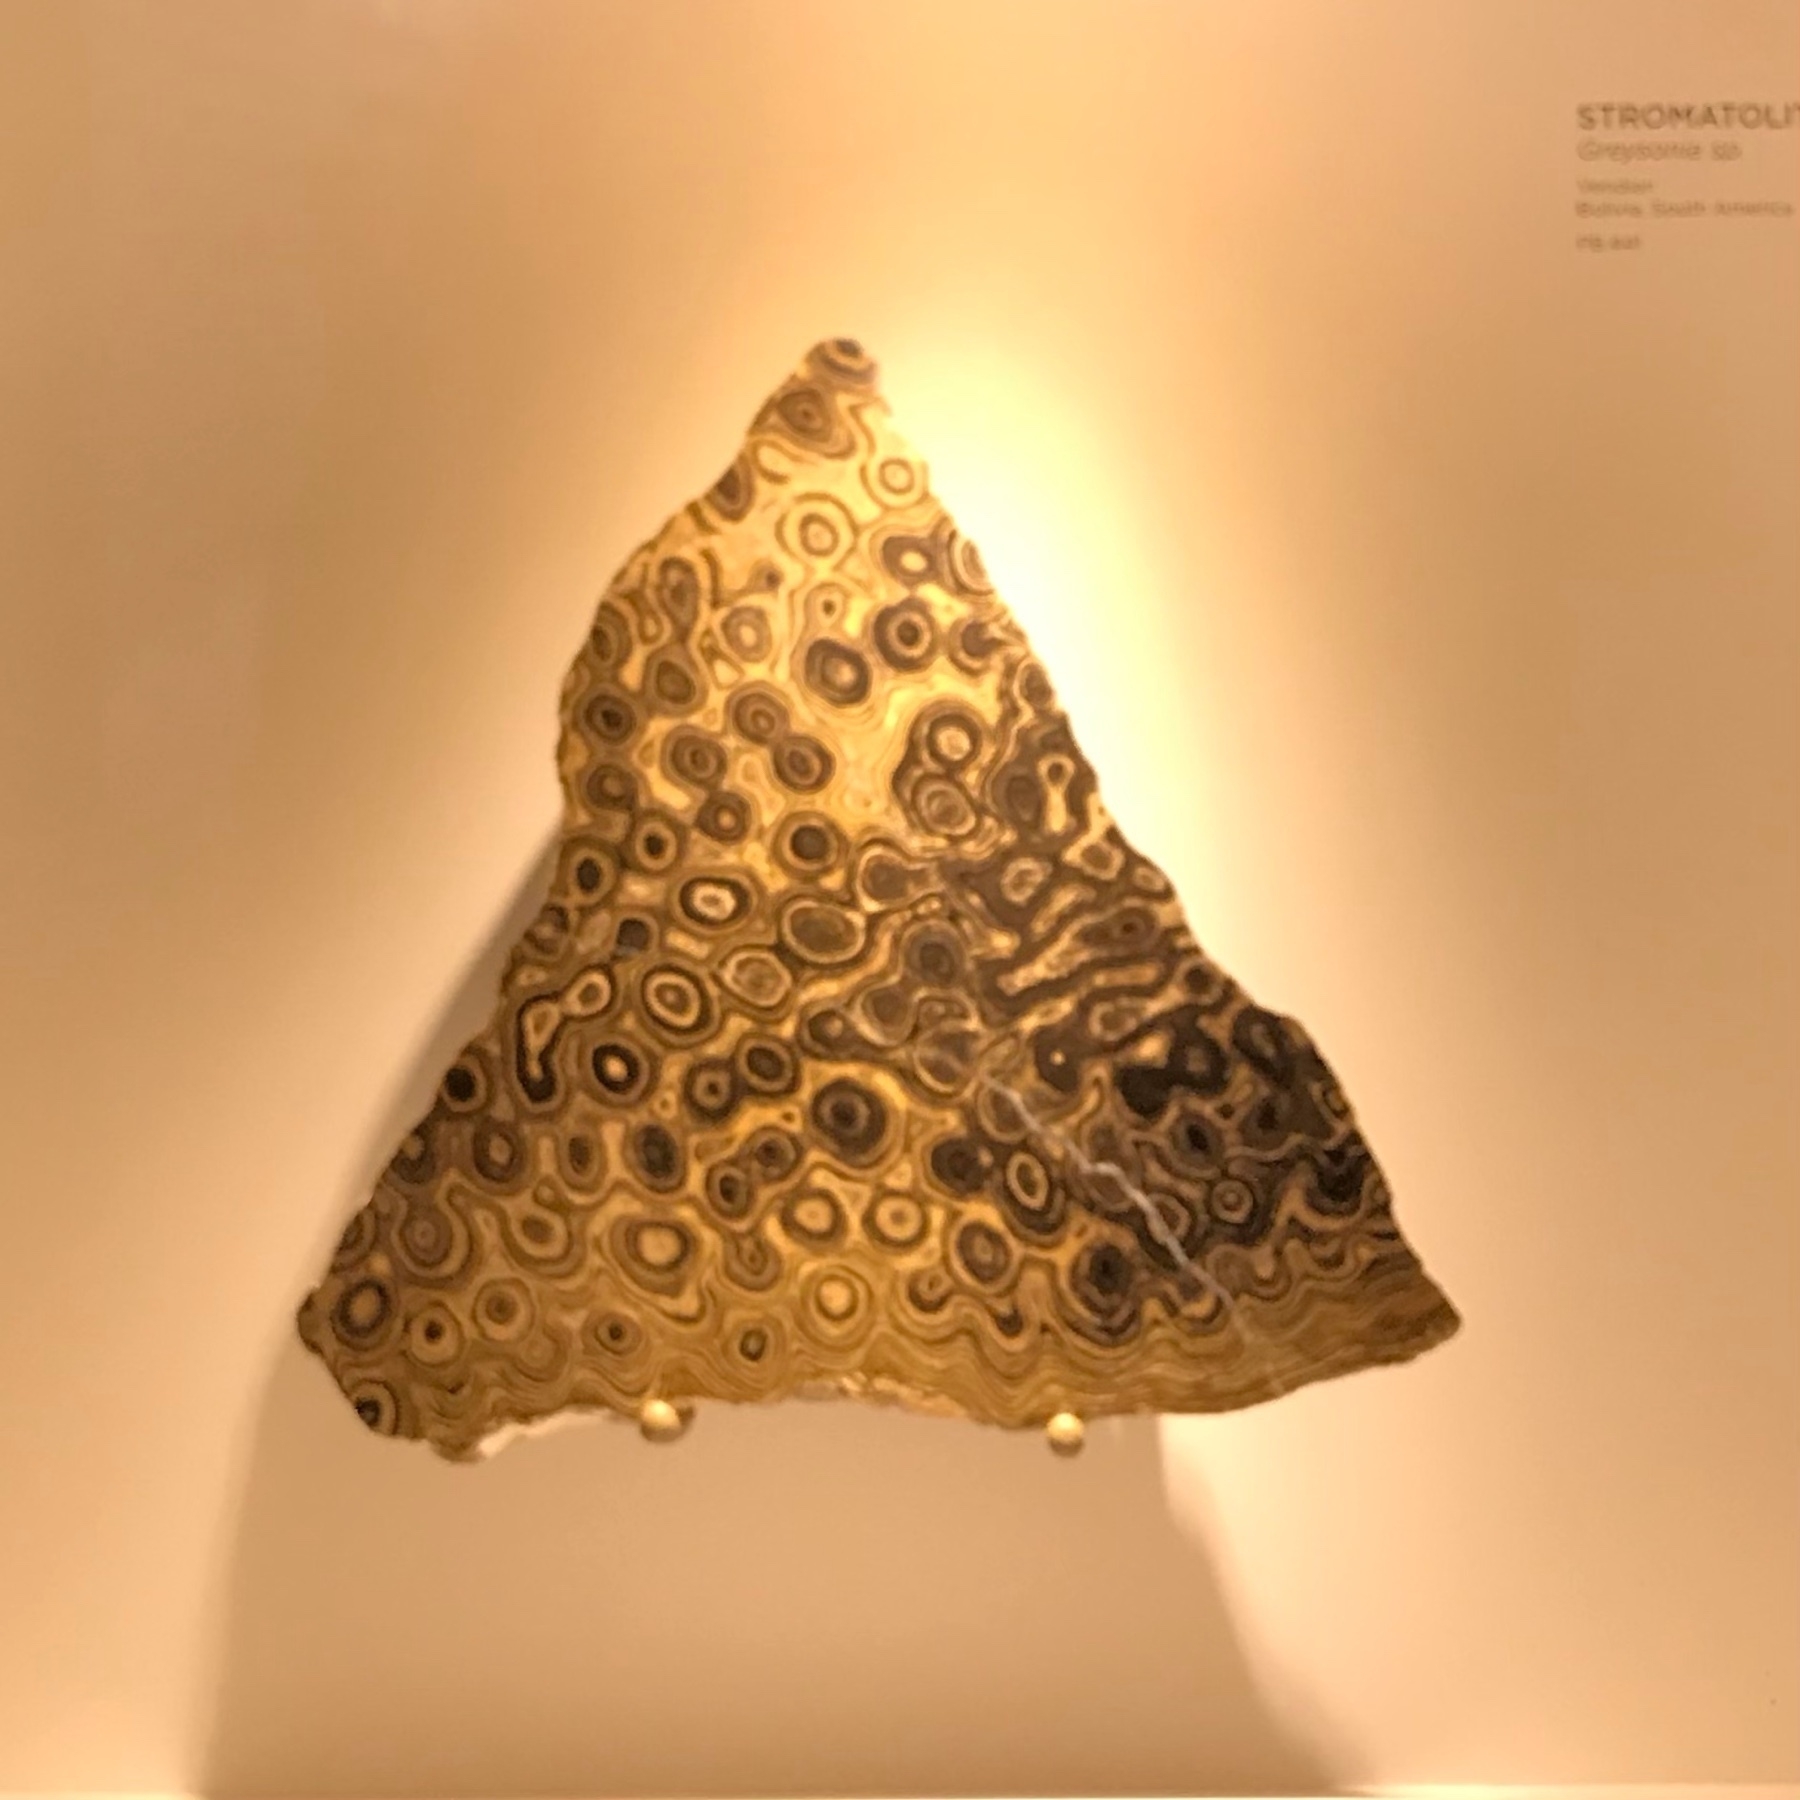 Stromatolite in a triangular shape with swirling circles inside